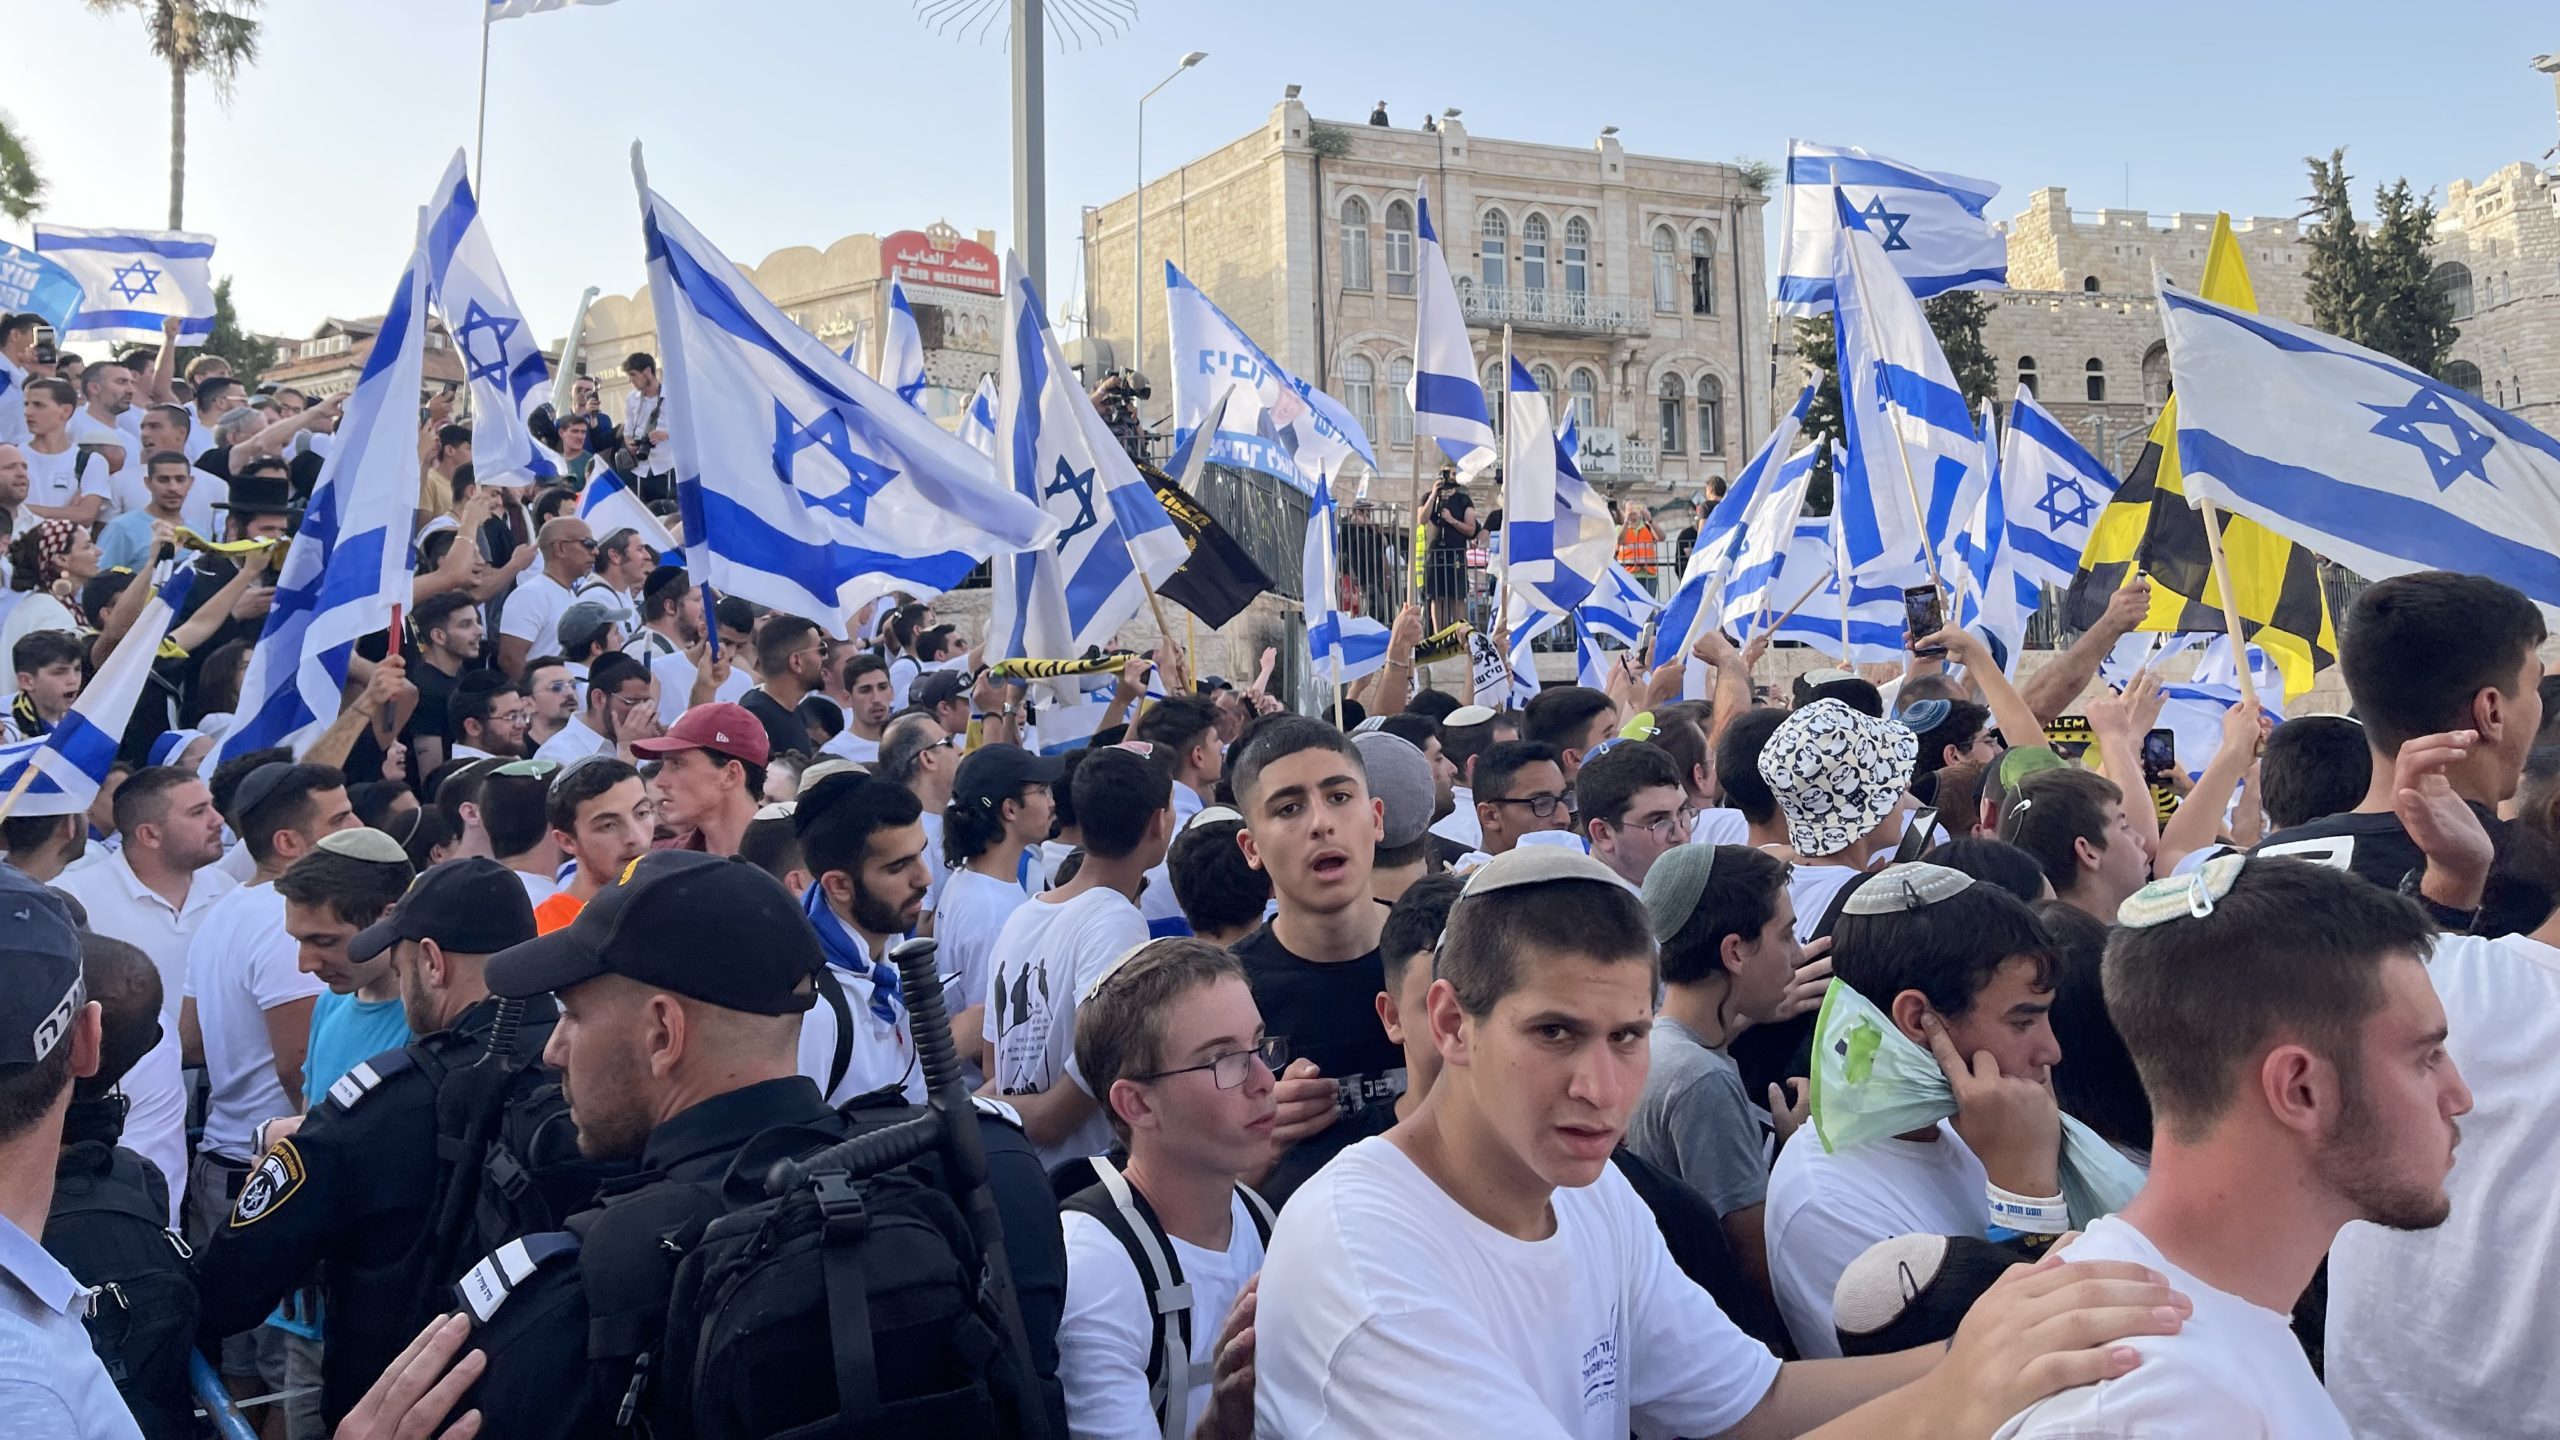 Extremists Chant Racist Slogans as Thousands of Israelis Rally in Jerusalem